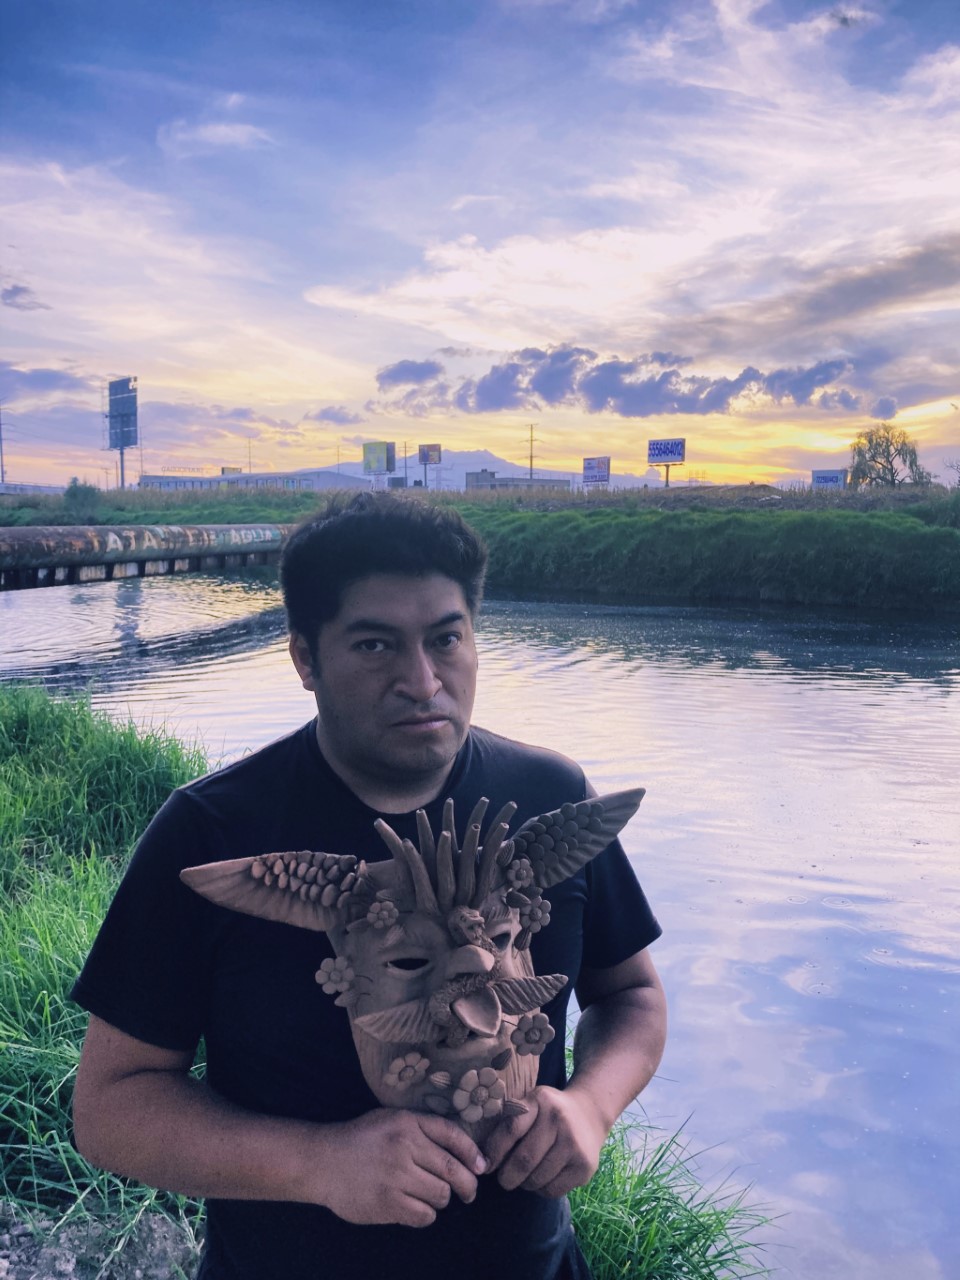 Man holding Mexican indigenous mask by river at dusk